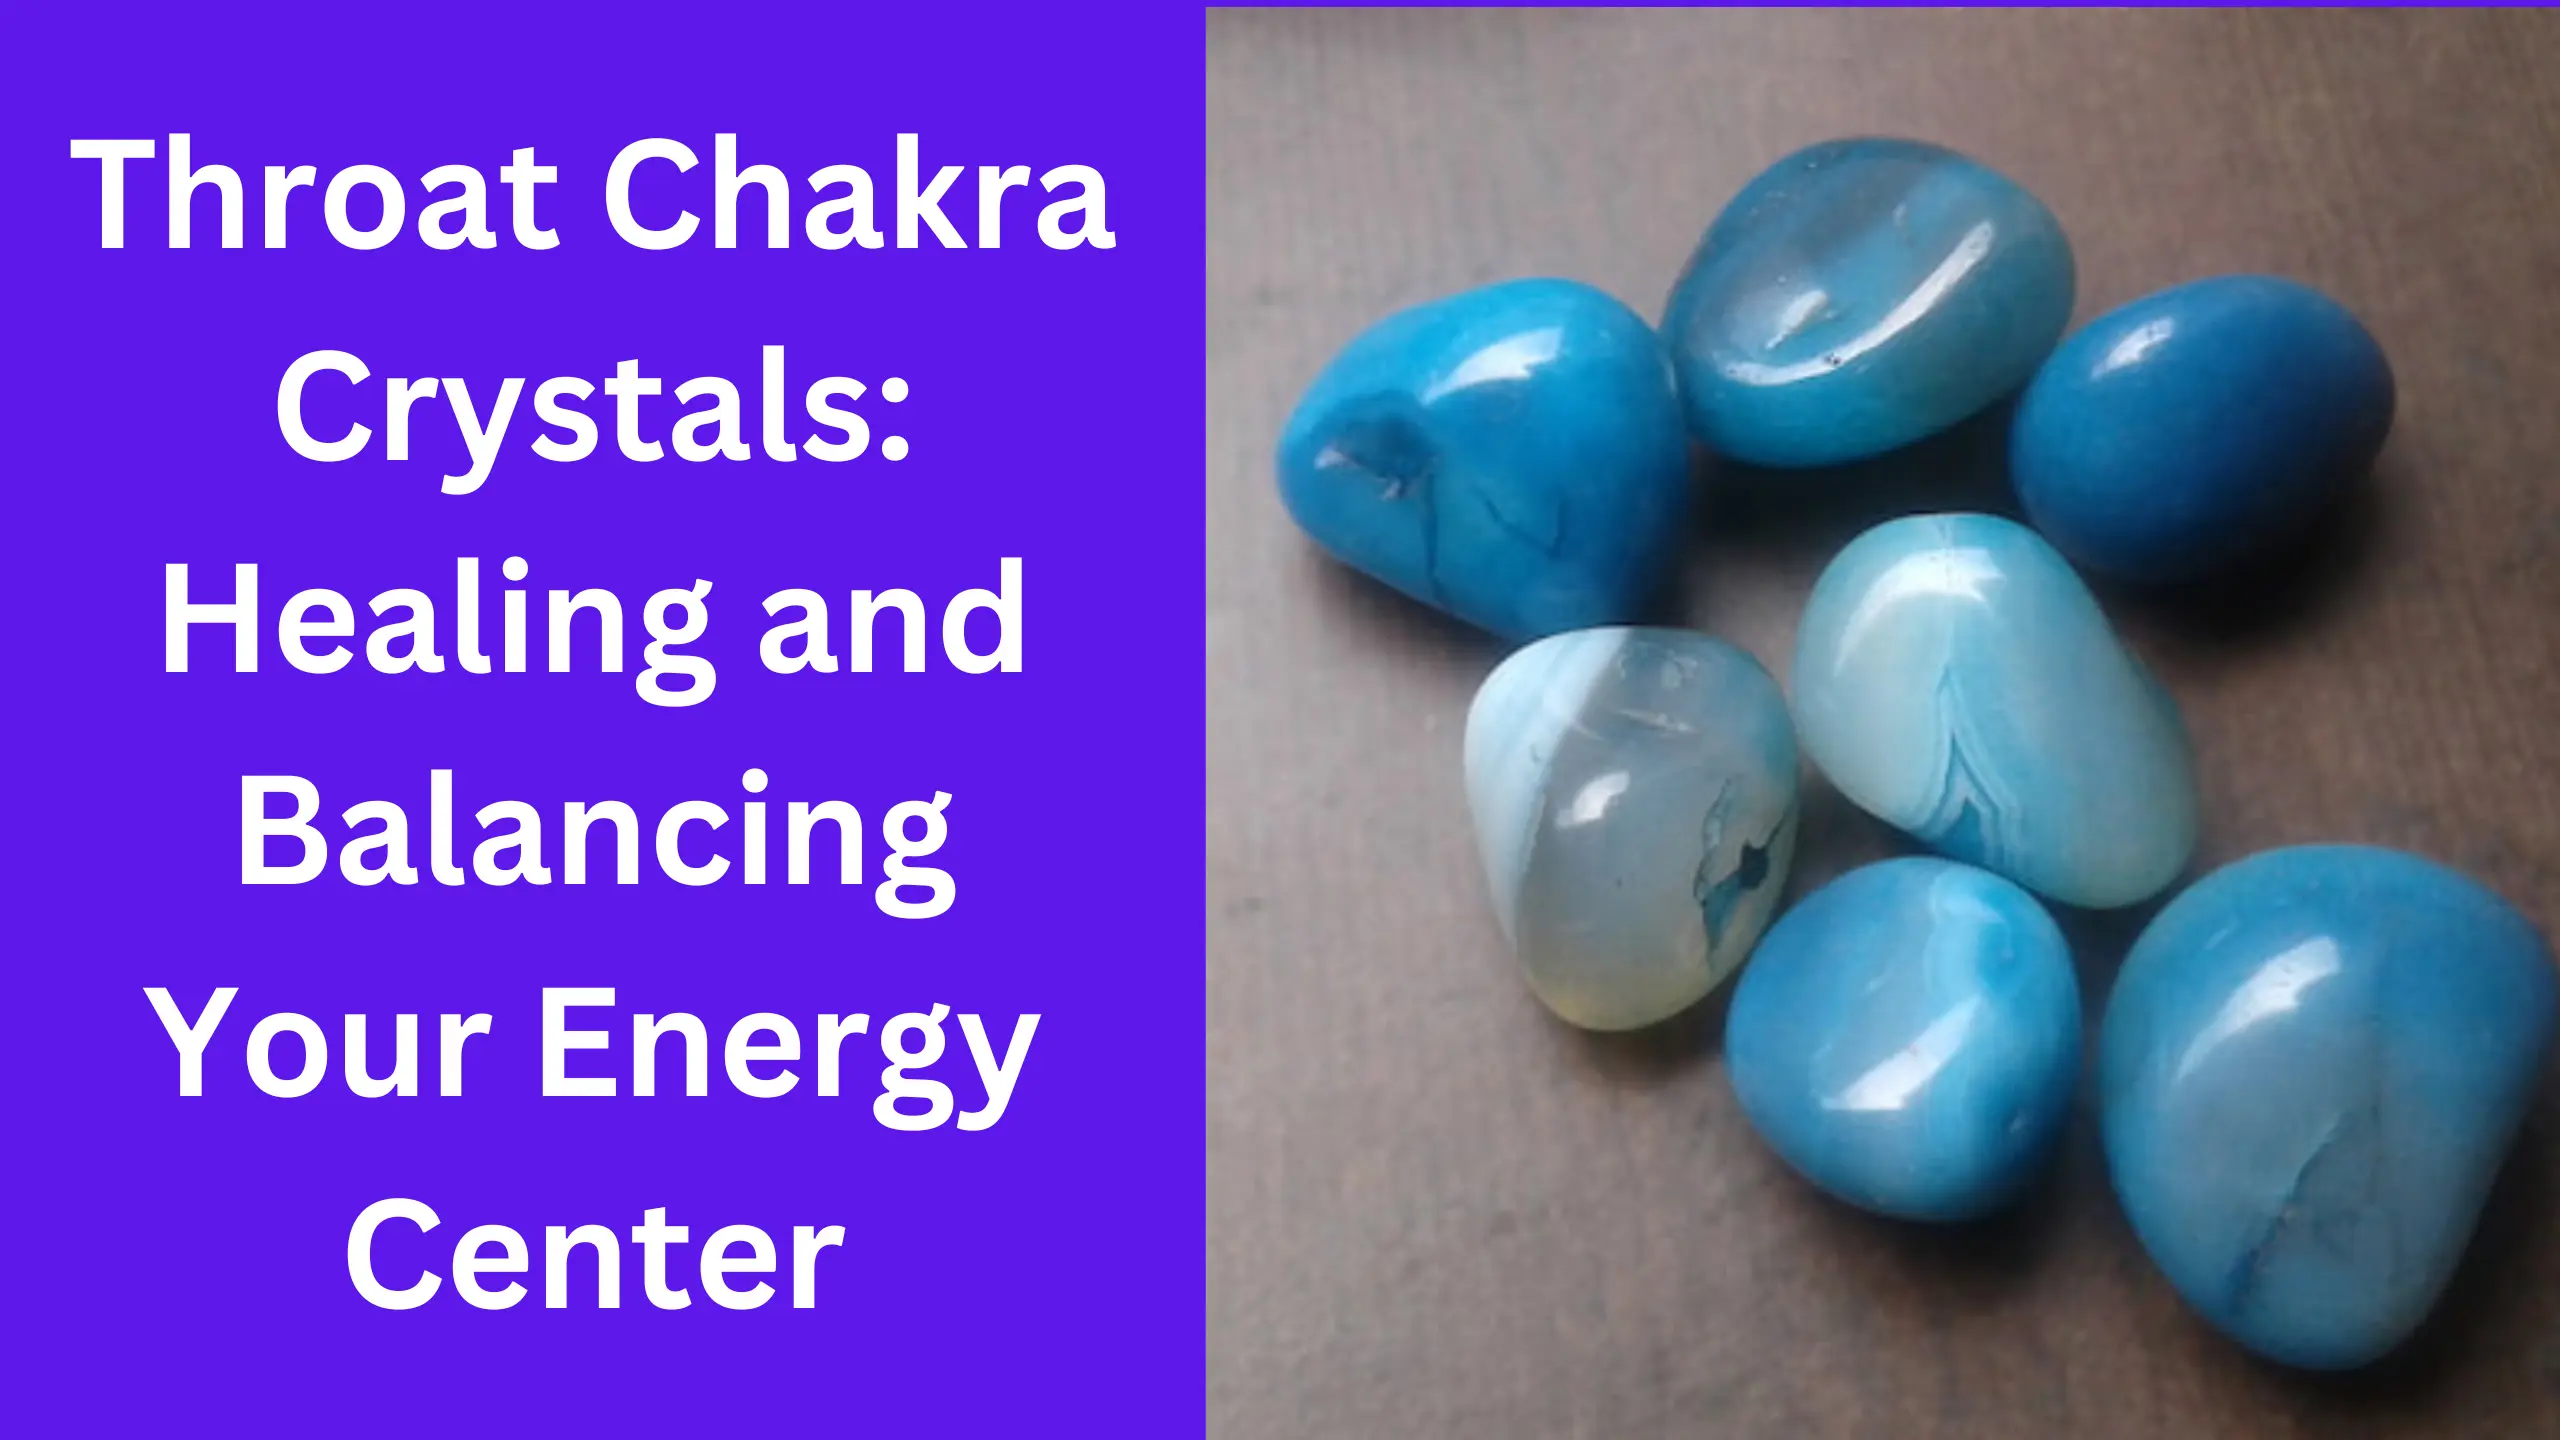 This article will explore some of the best crystals for the throat chakra and how to use them in your daily life.